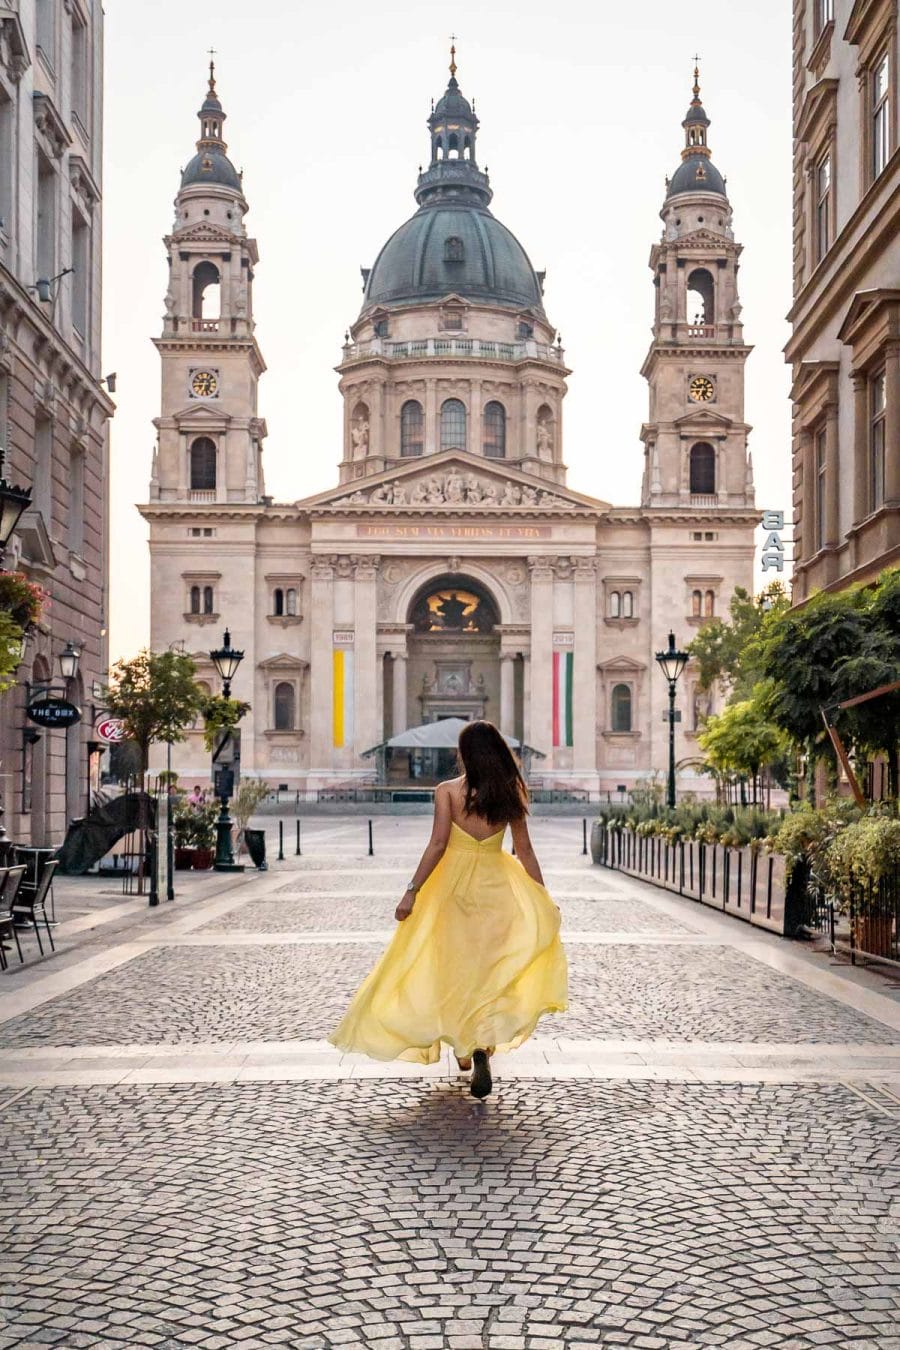 Girl in a yellow dress running towards the St. Stephen's Basilica in Budapest